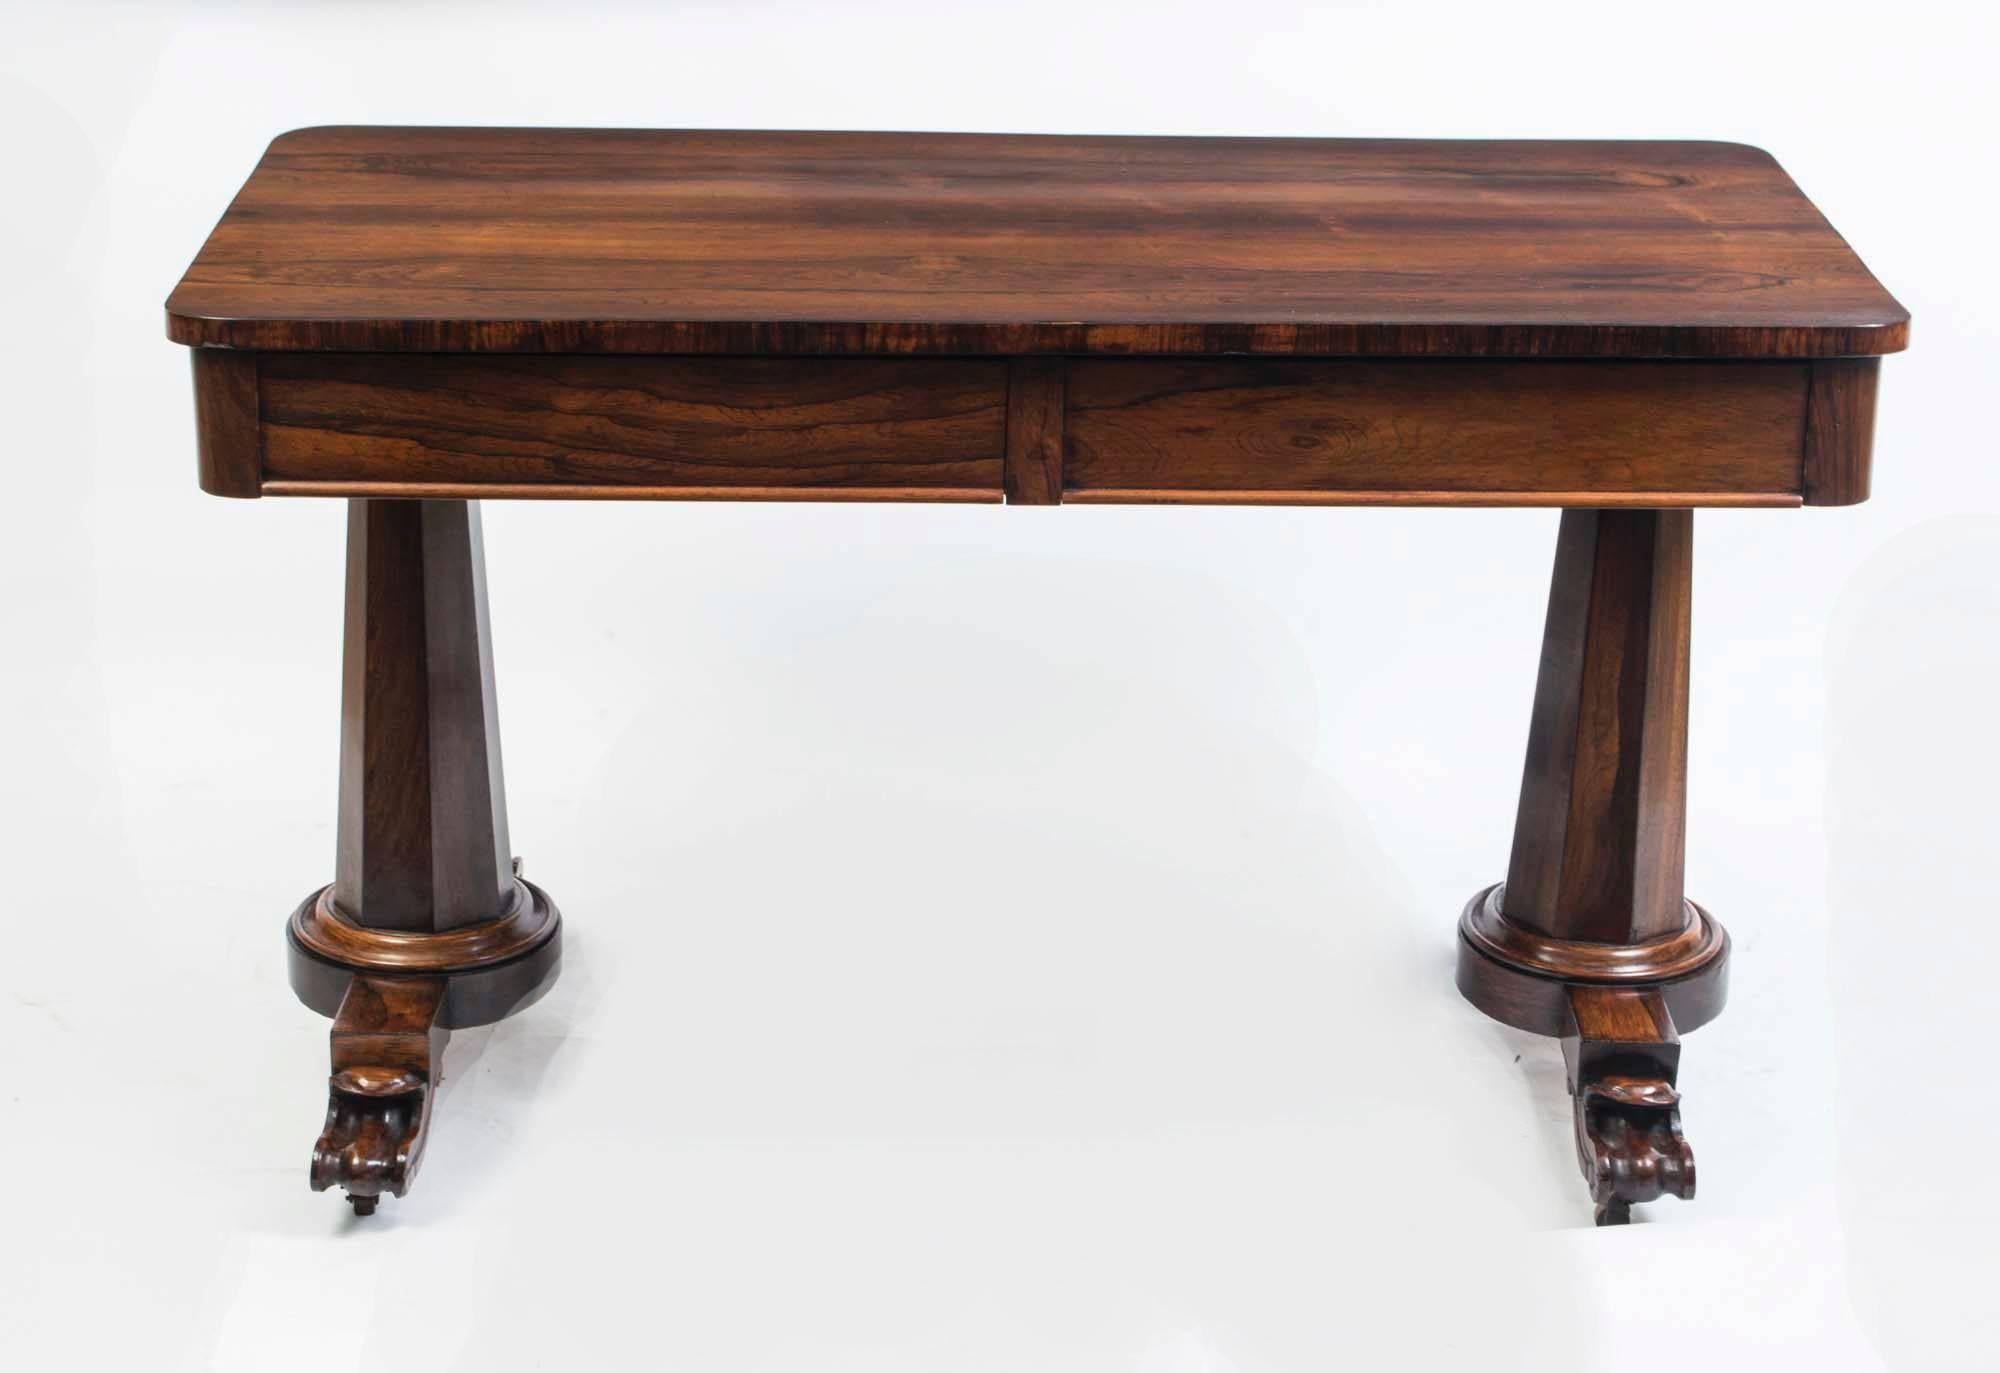 This is a very nice, original, Antique Sofa Table or antique Writing Table, typical of the William IV period and dated by our experts to have been made around 1830.

This antique sofa table is one of the oldest pieces that we currently have listed